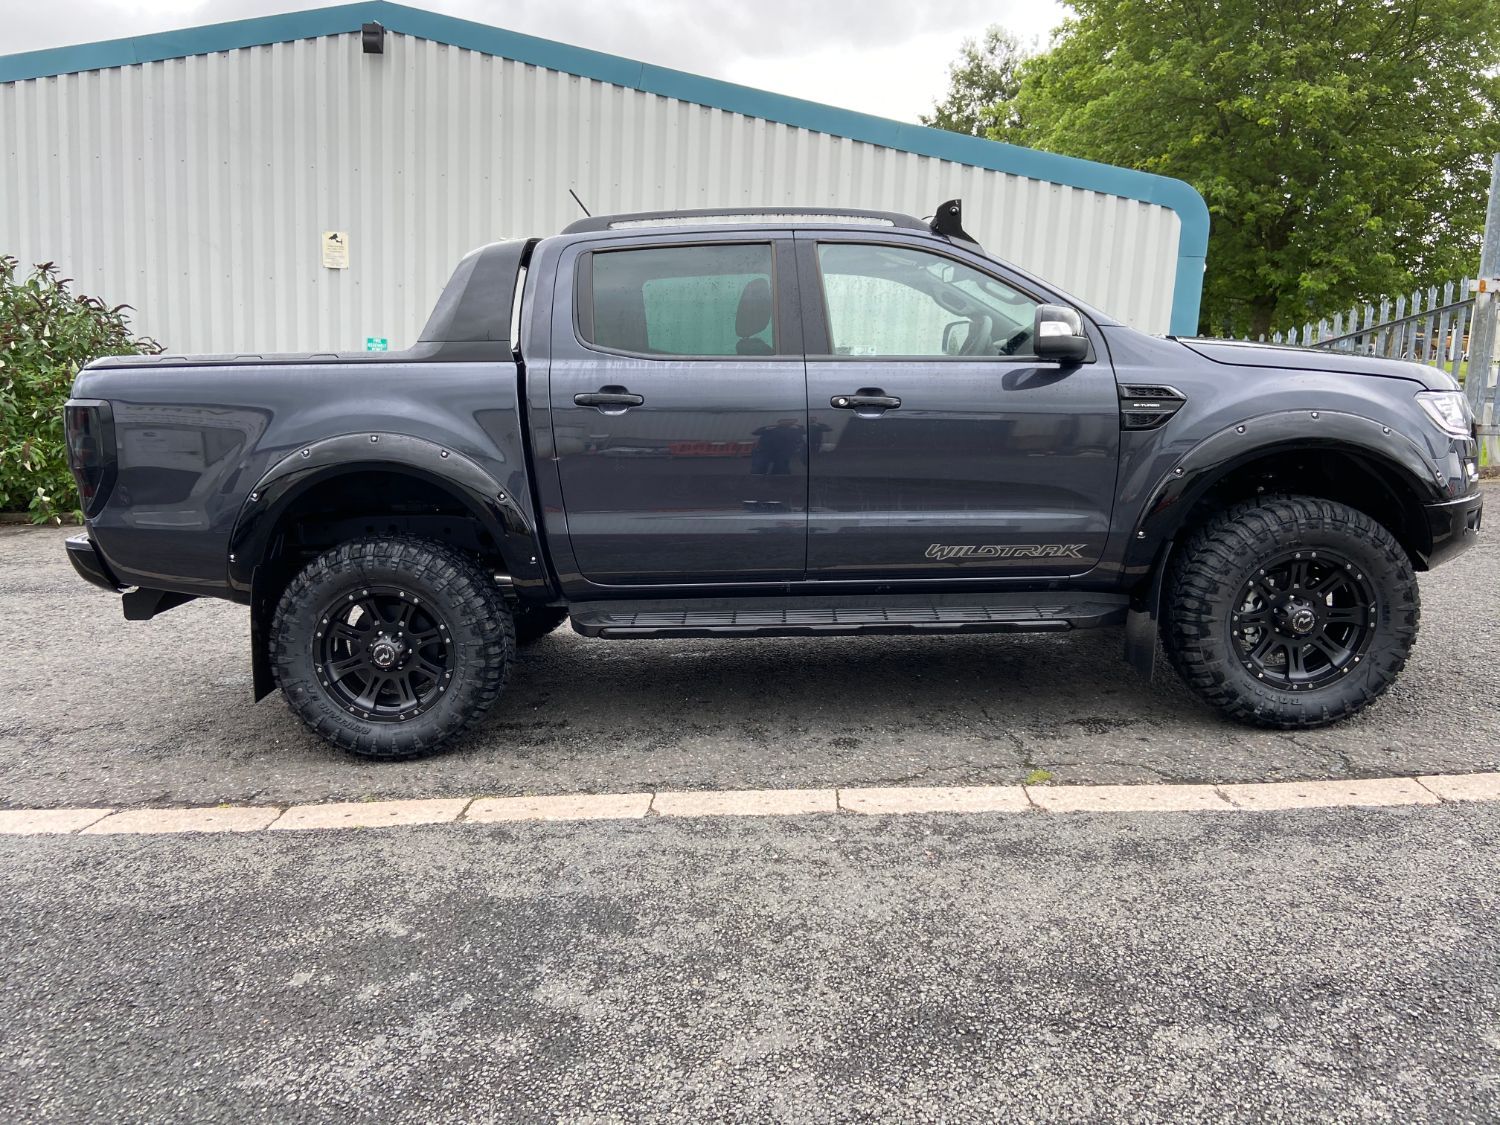 Used FORD RANGER in Nelson, Lancashire | Vertex Vehicles 1996 Ford Ranger 4.0 Towing Capacity